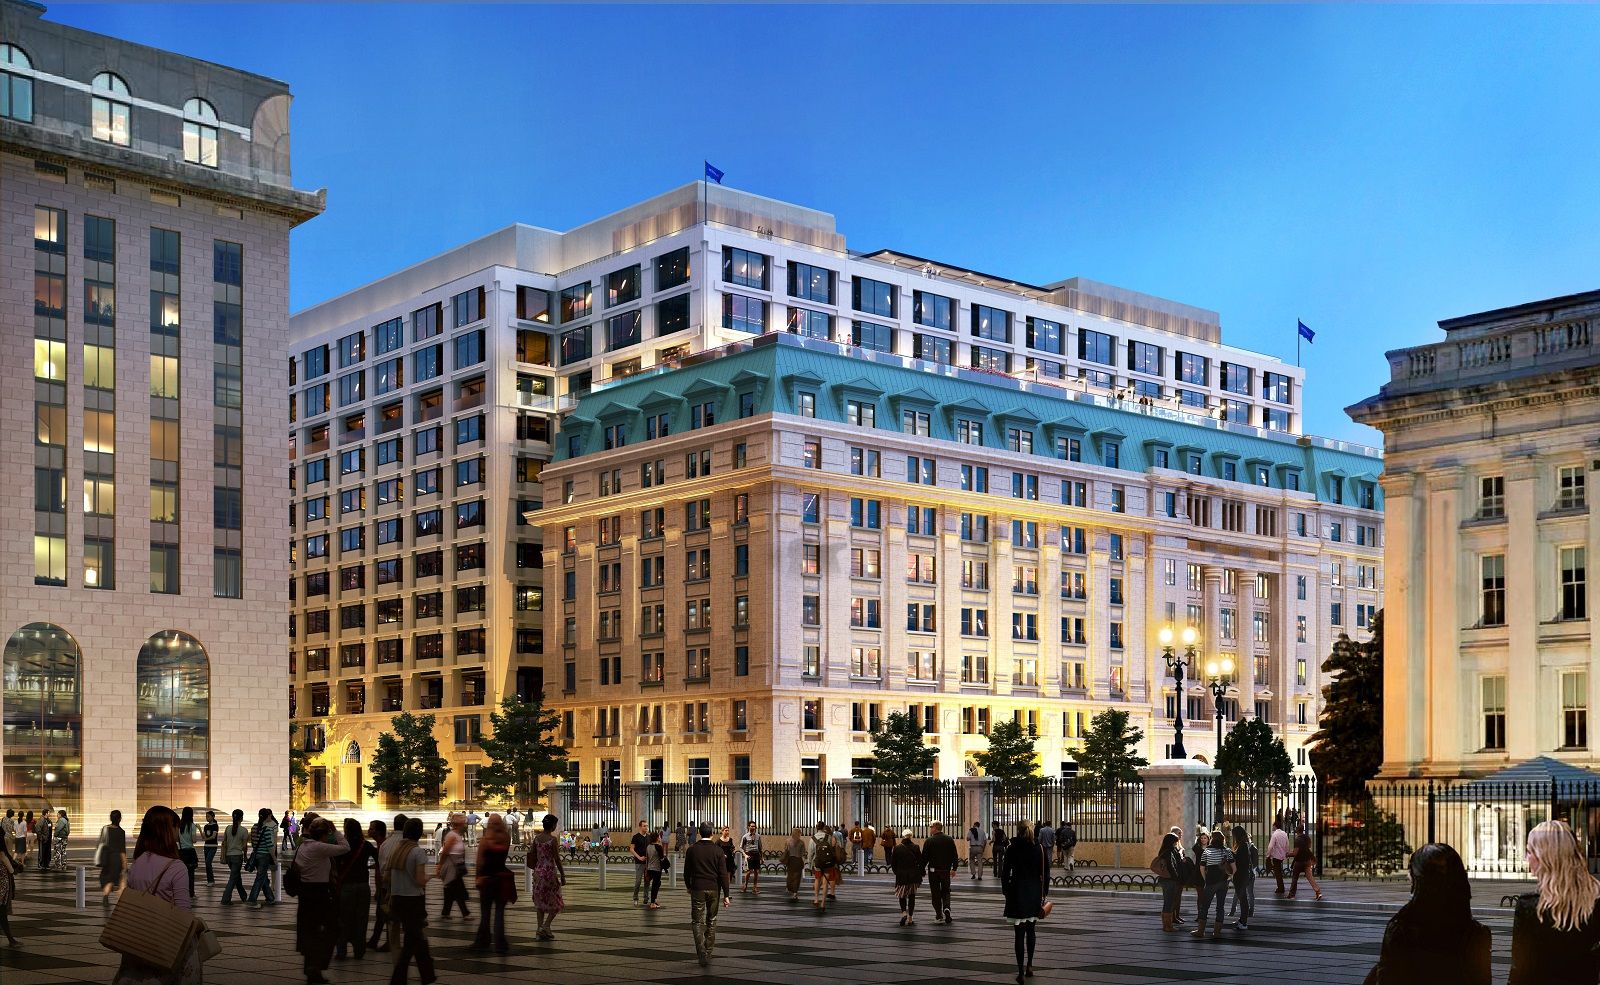 The Metropolitan Square in downtown D.C. faces a $60 million renovation in hopes to attract top-notch tenants to the property. (Courtesy of Newmark Knight Frank)